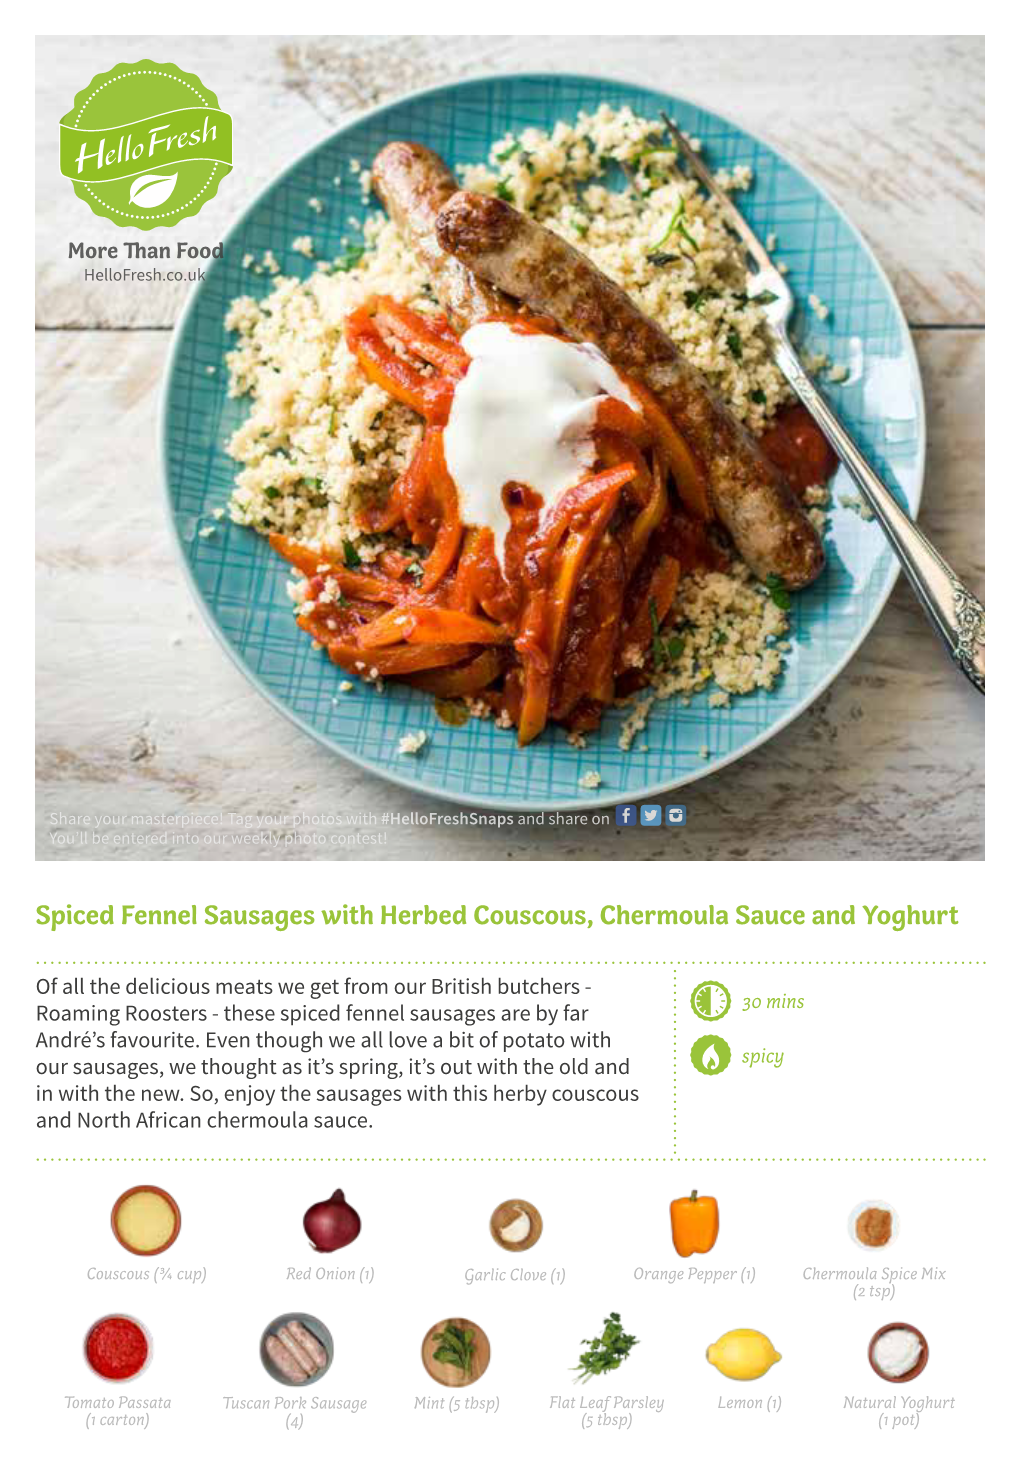 Spiced Fennel Sausages with Herbed Couscous, Chermoula Sauce and Yoghurt